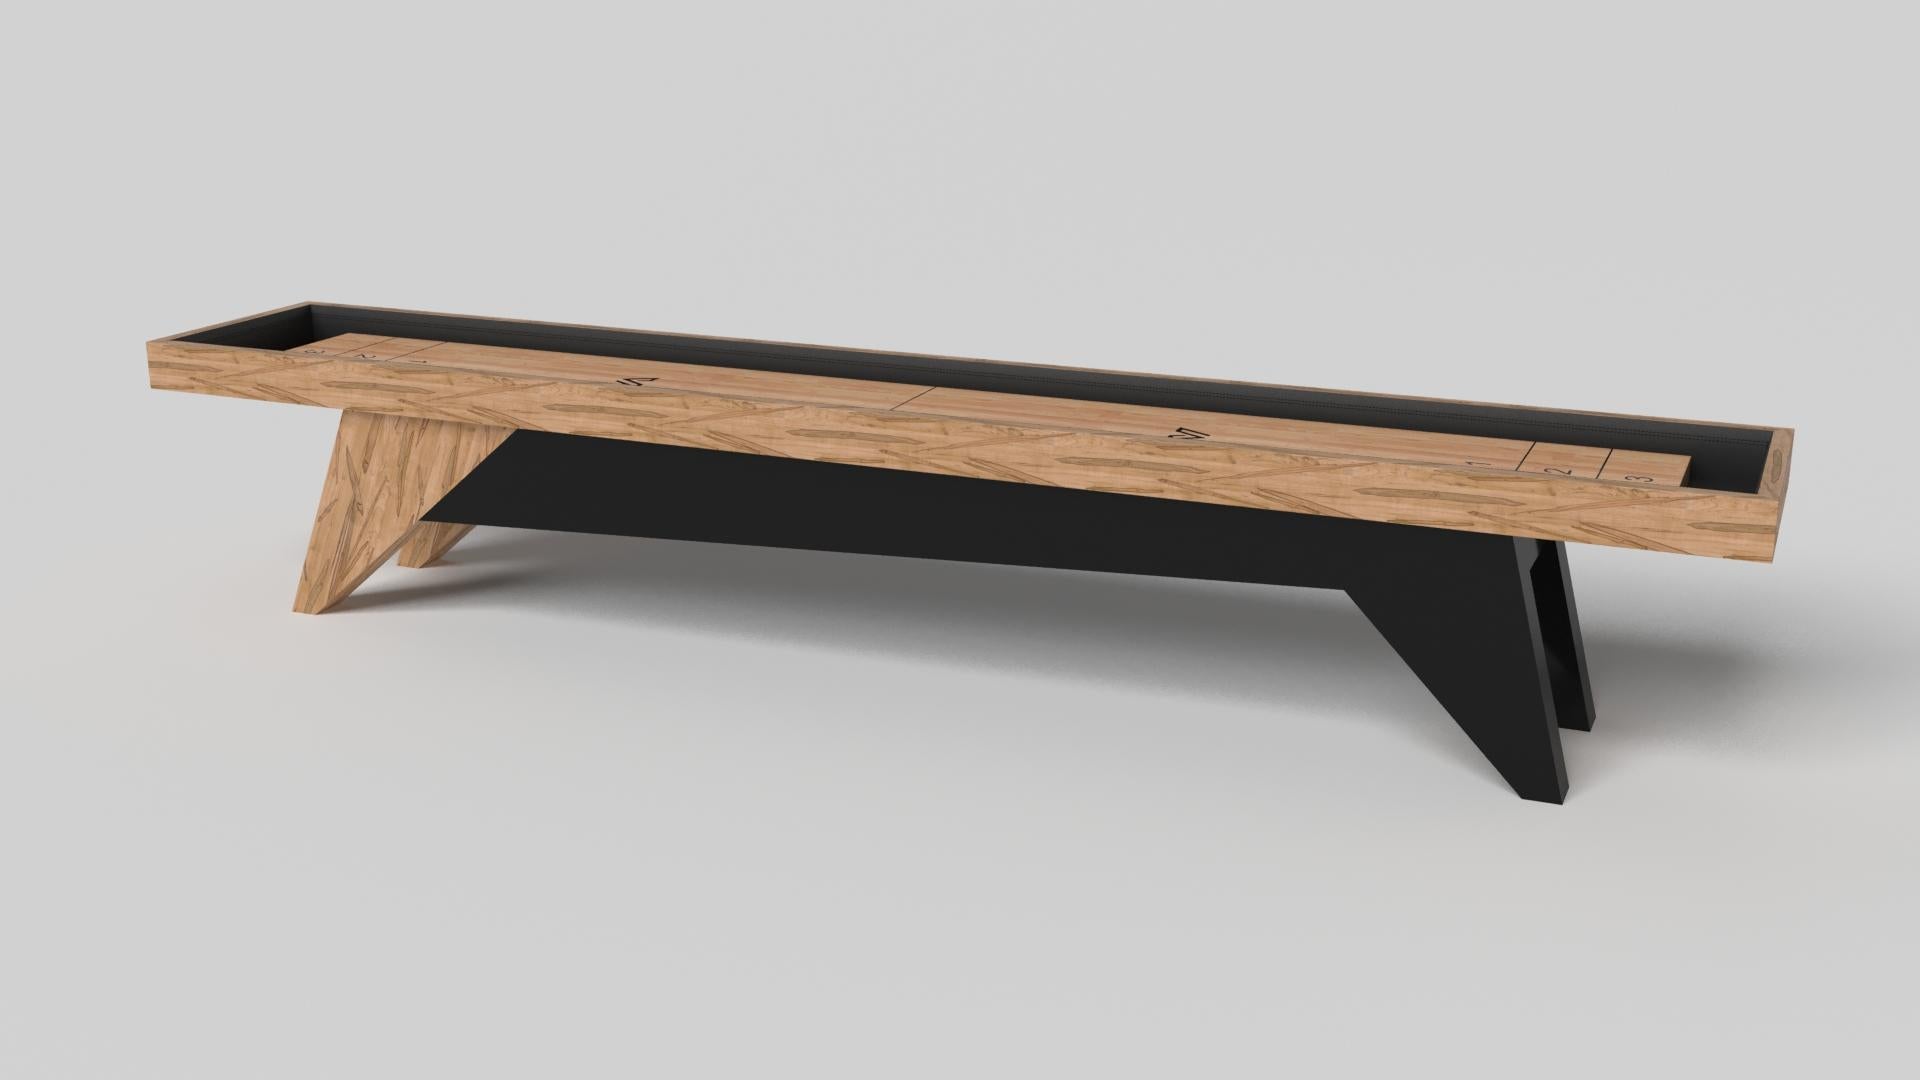 Simple yet sophisticated, the Mantis shuffleboard table puts a fresh, modern spin on a classic four-legged design. Sharp angles and tapered legs provide sleek stability.

Size:

18 Foot - 216”X32”X34”
Playing Area Of 200”X20”